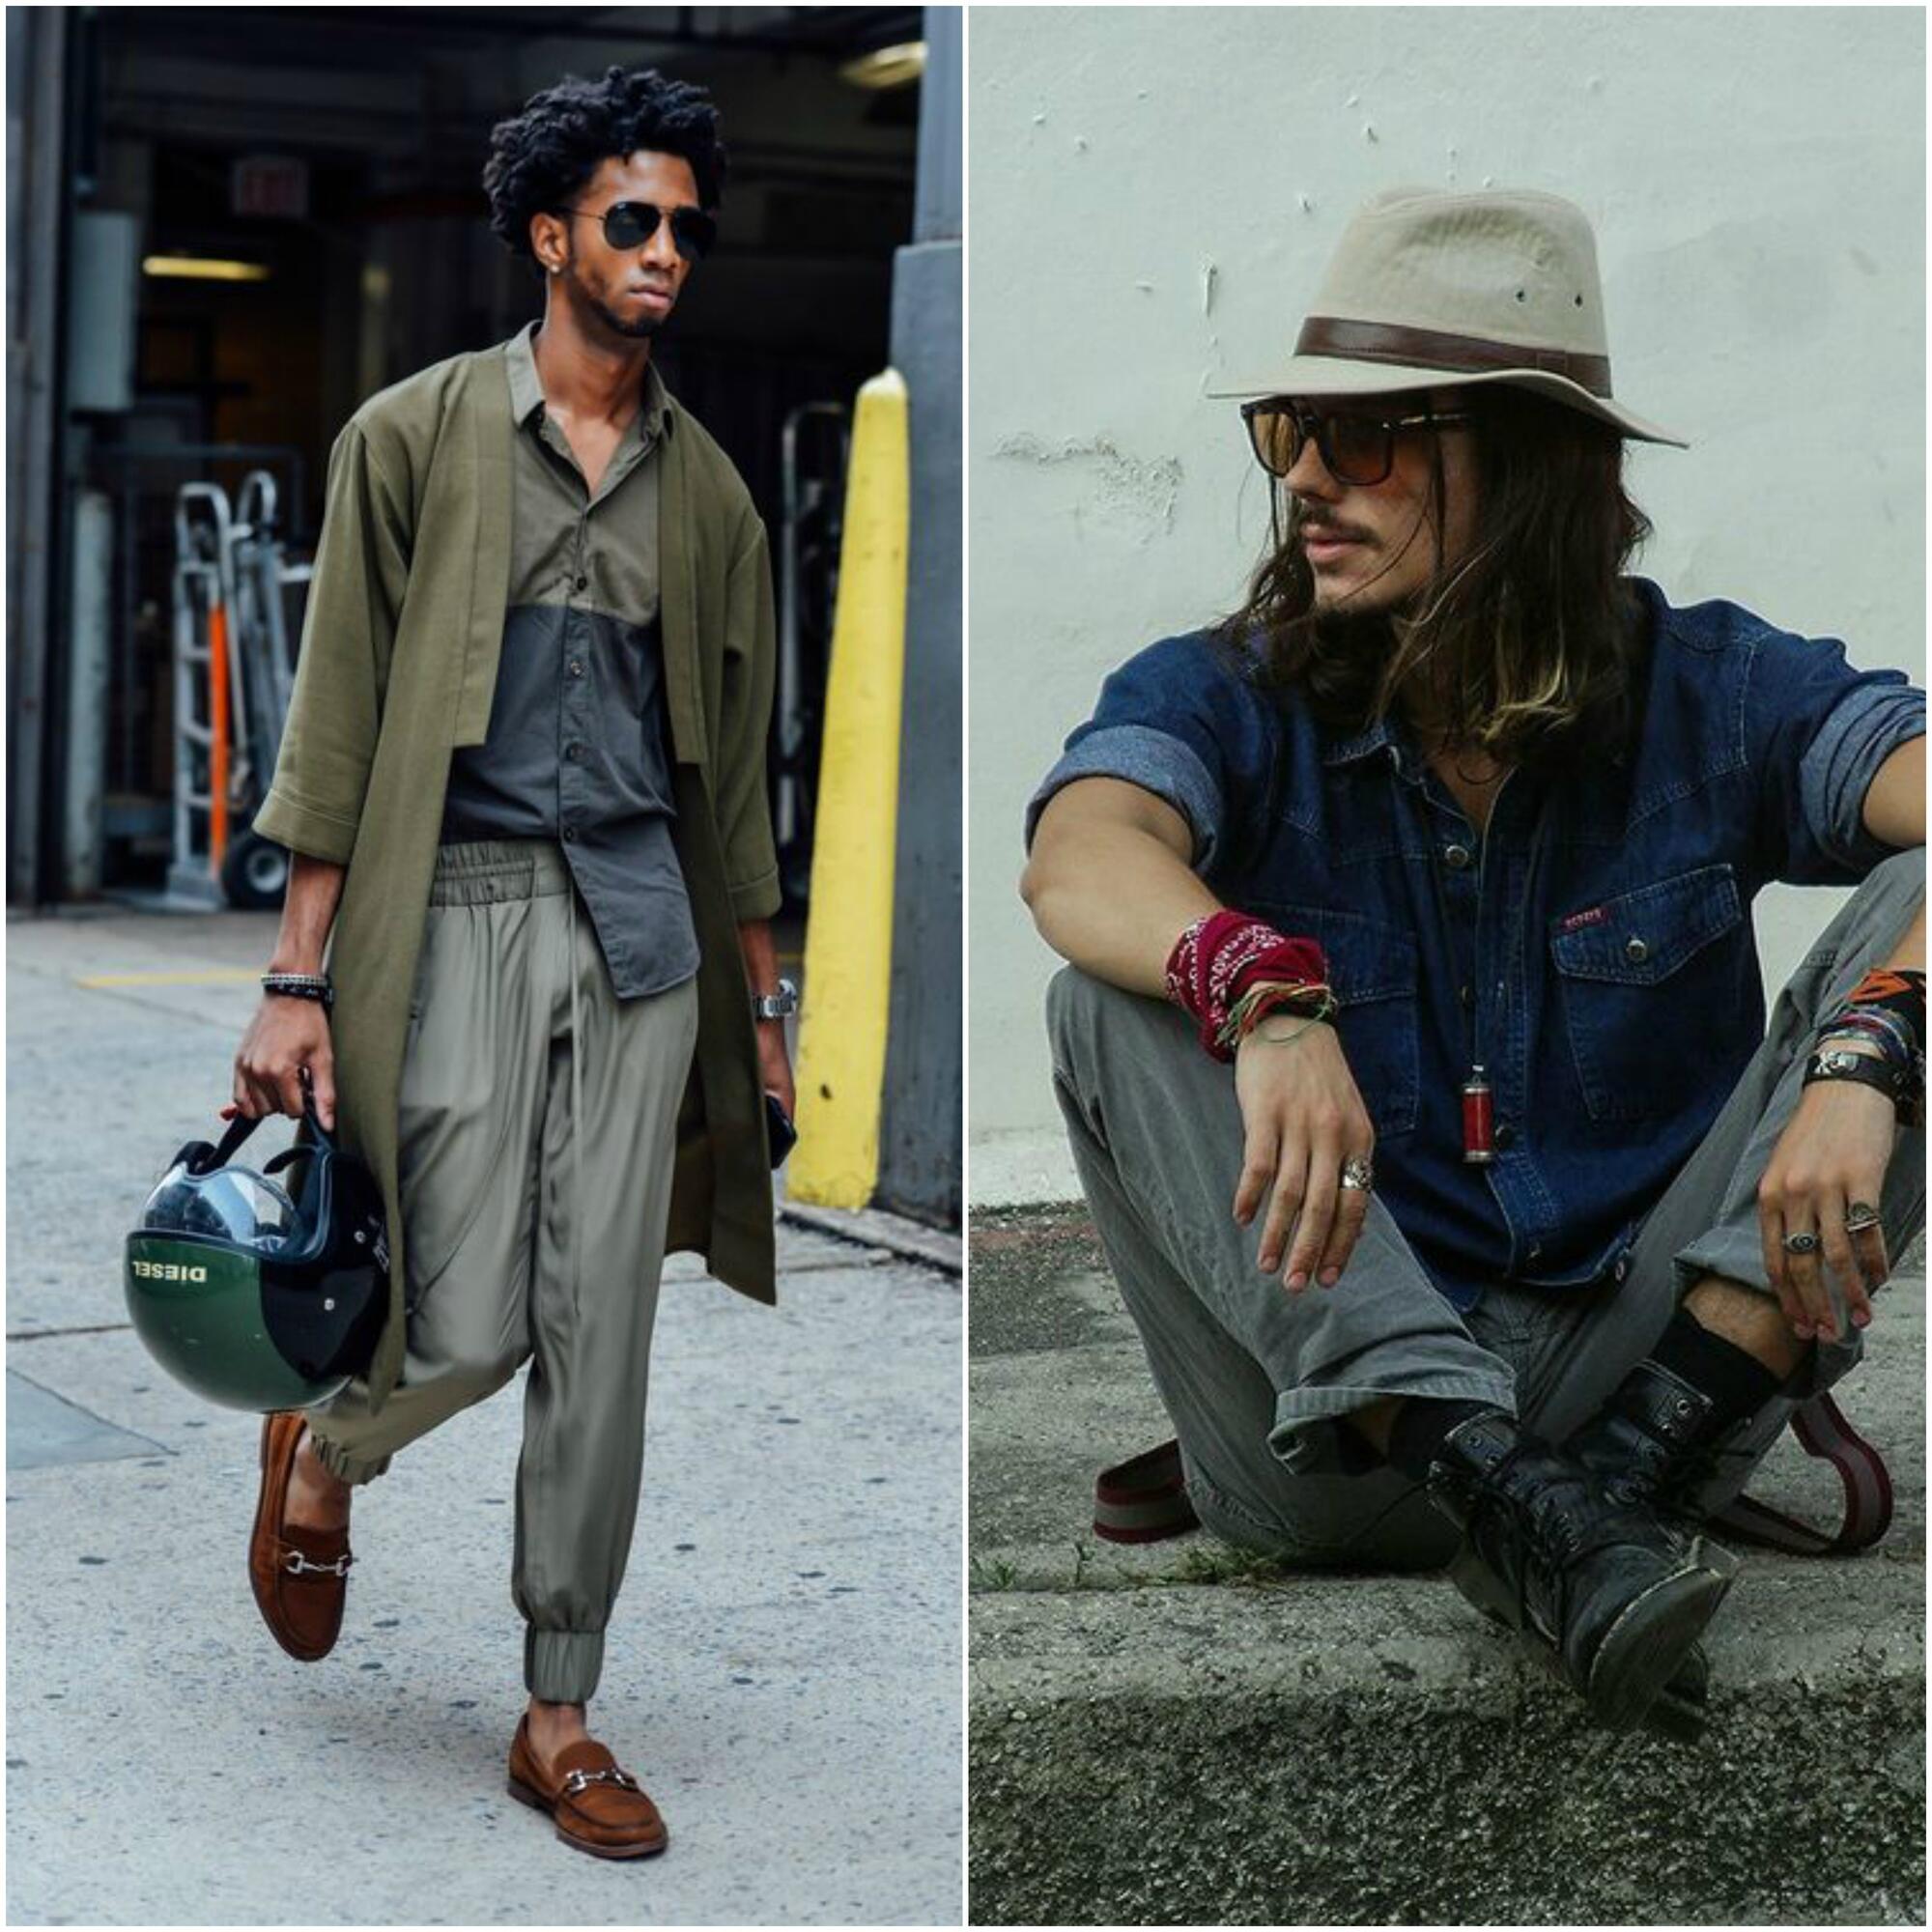 5 Men Fashion Tips To Master That Bohemian Style You Desire So Much ...